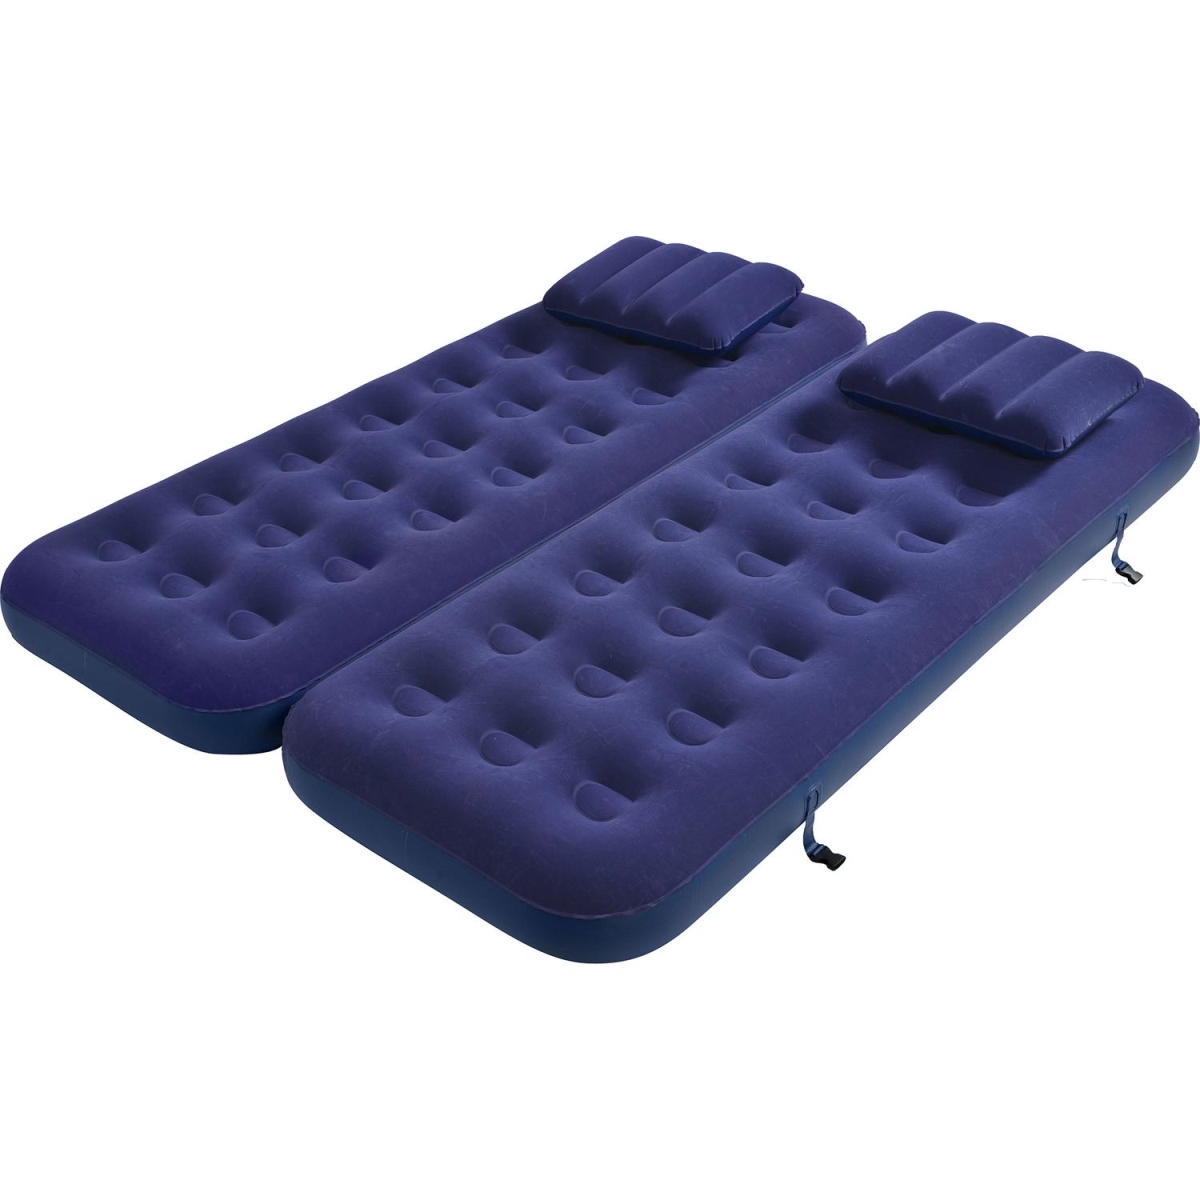 Picture of Pool Central 32601998 75 in. Navy Blue 3 in 1 Inflatable Flocked Air Mattress with Pillows